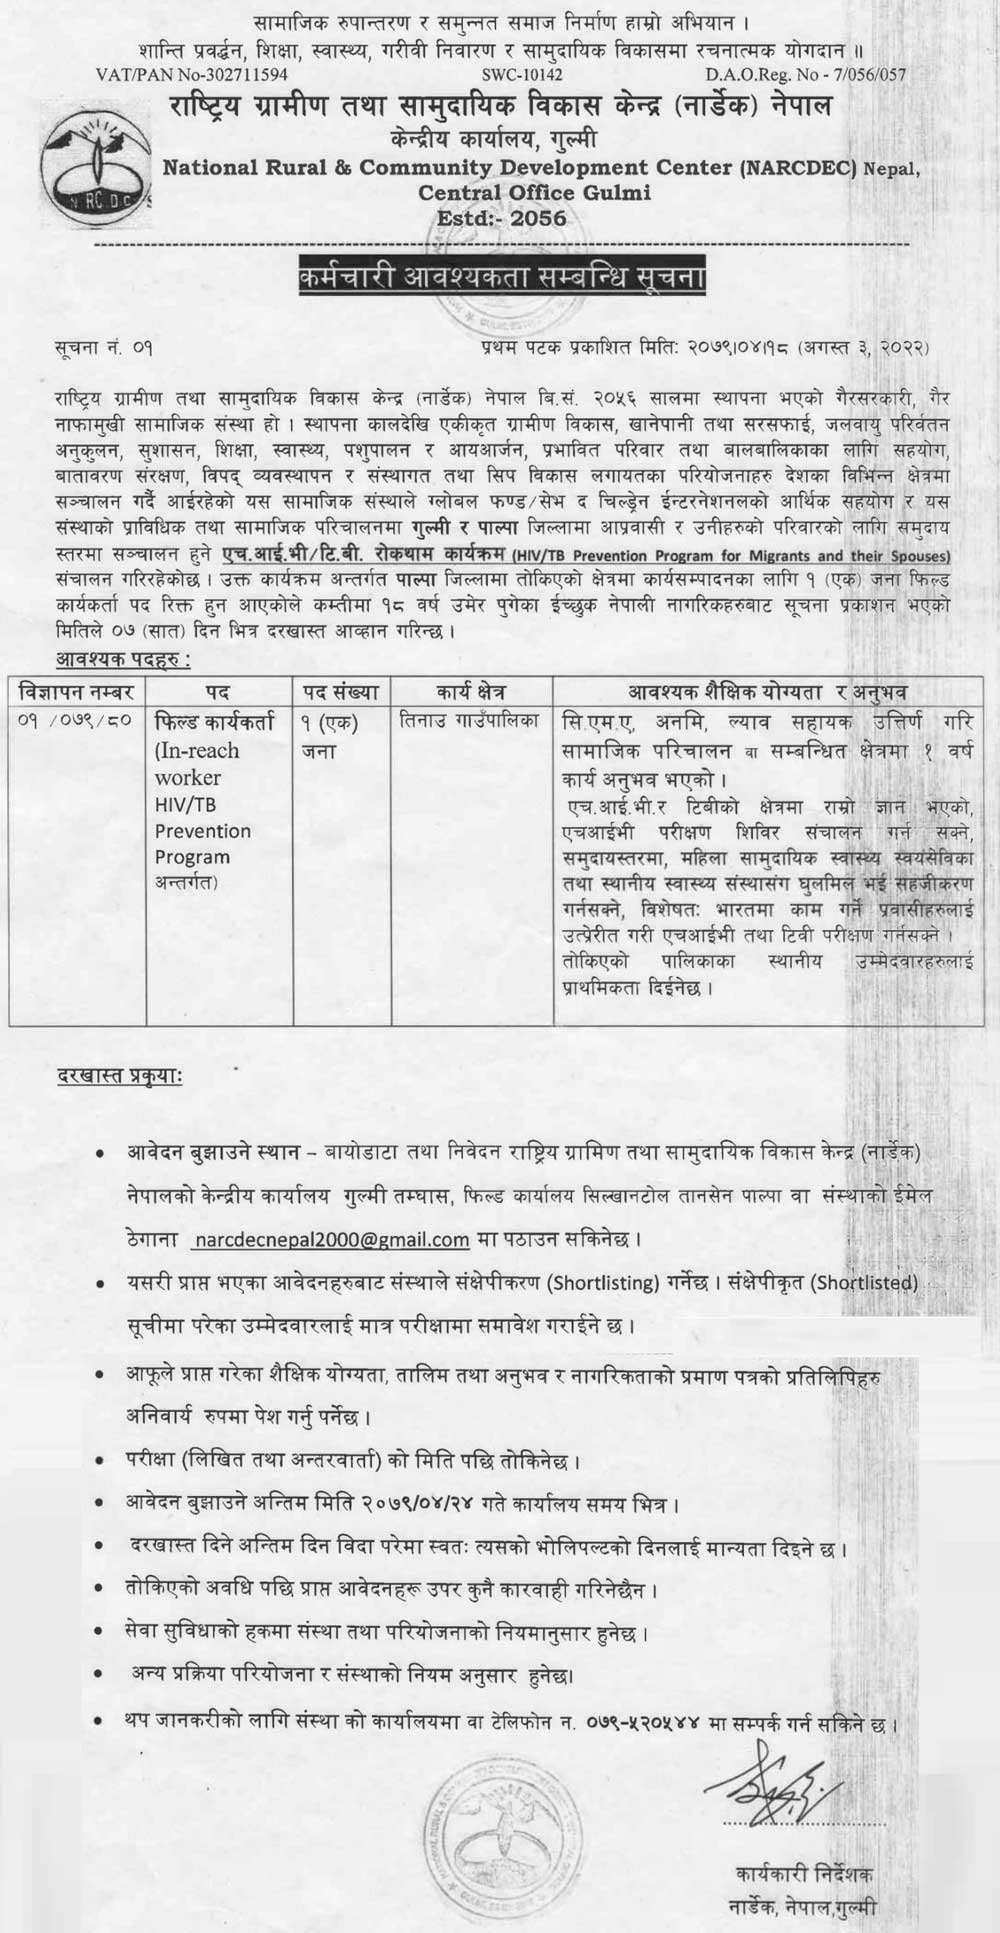 National Rural and Community Development Center (NARDEC) Nepal Vacancy for Field Worker